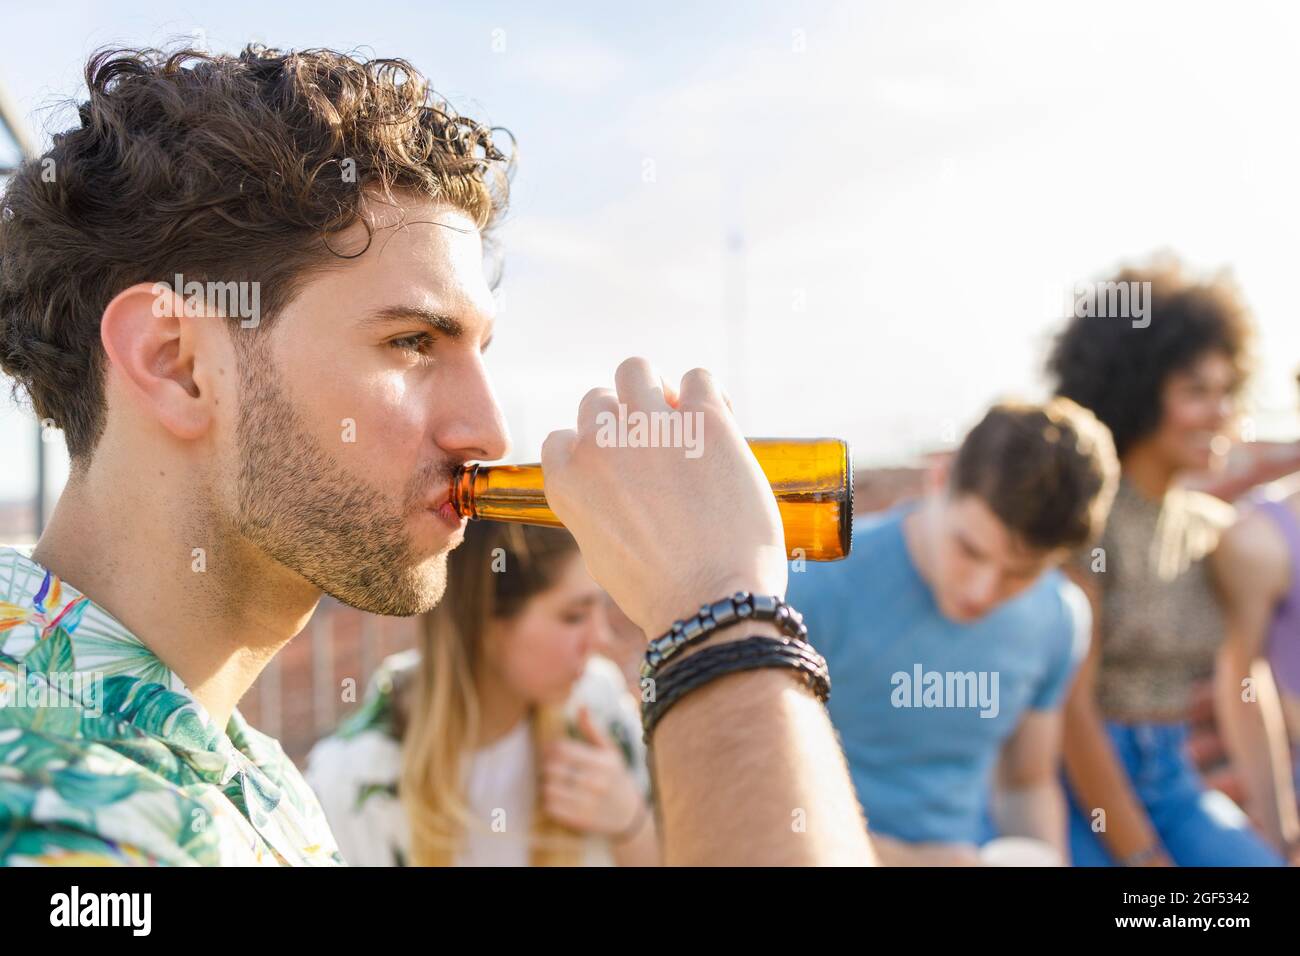 Young man drinking beer during party Stock Photo